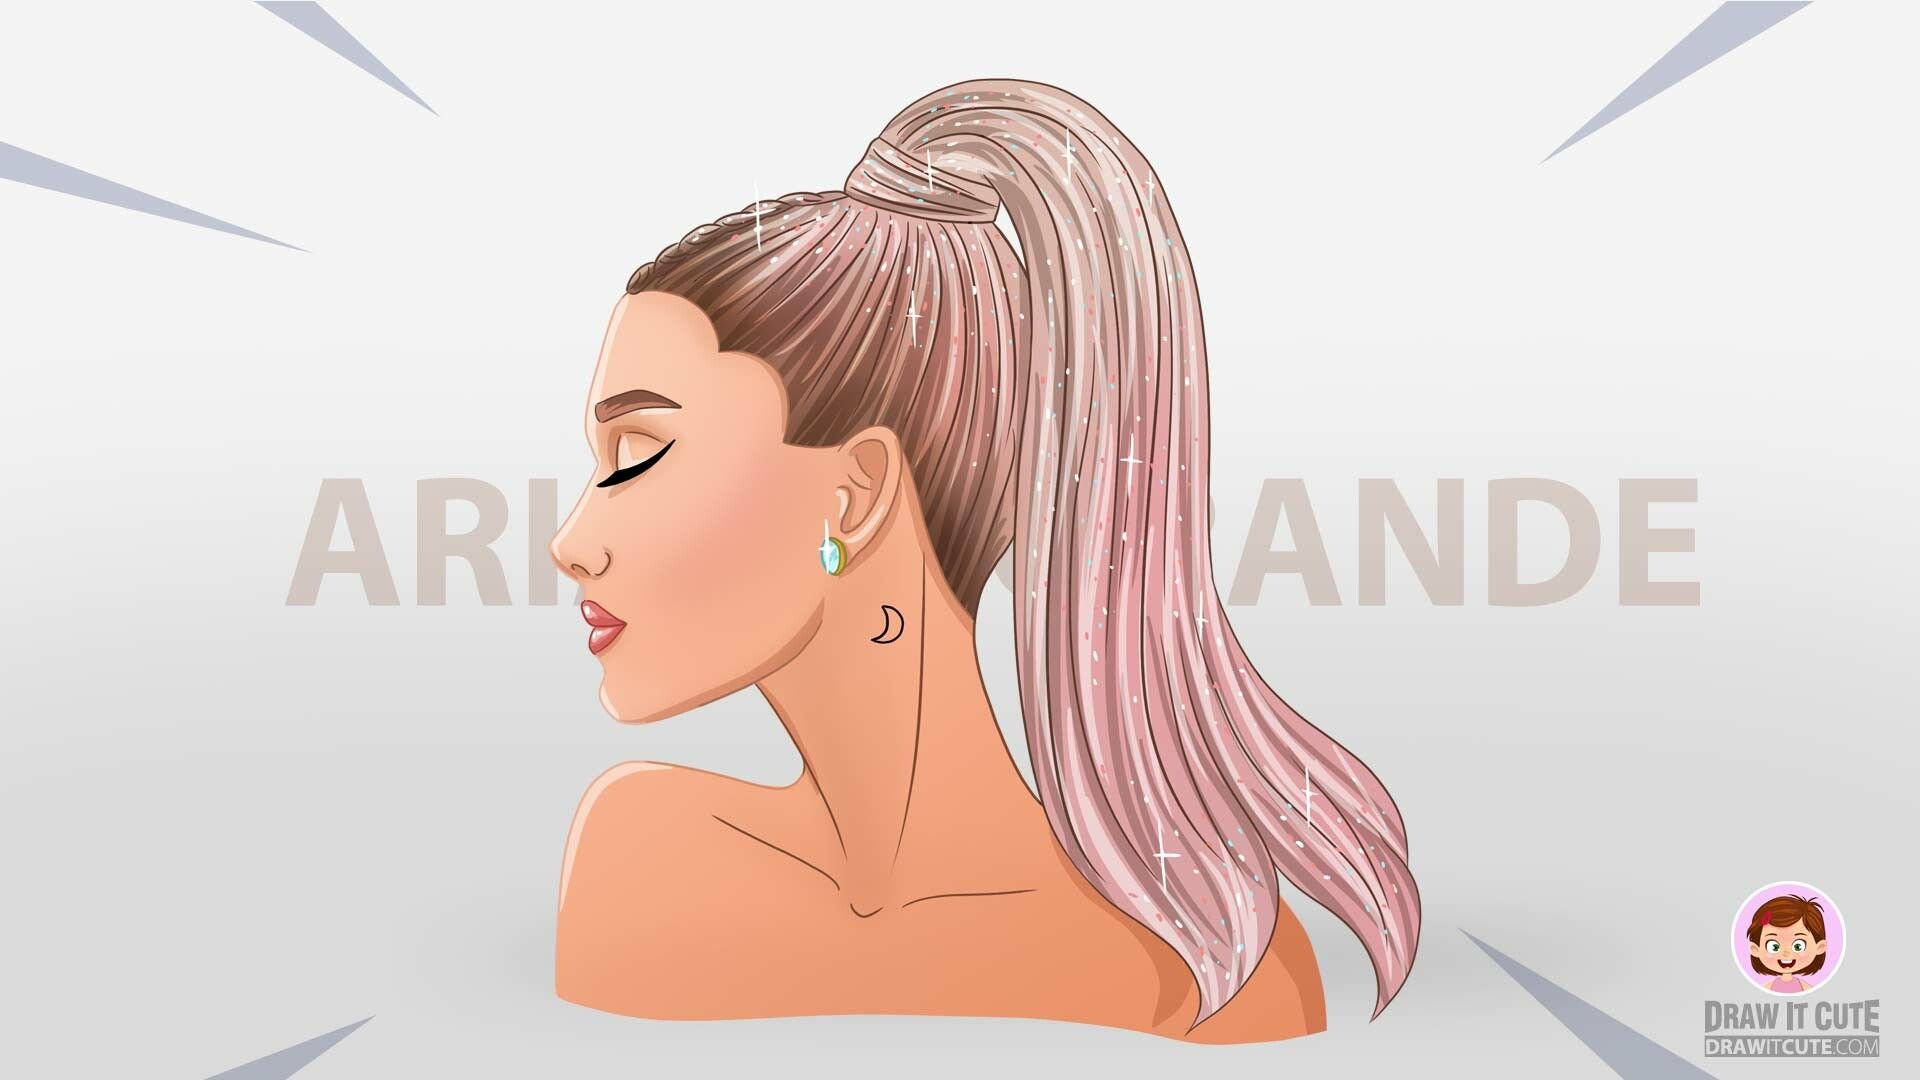 How To Draw Ariana Grande. Step By Step Guide